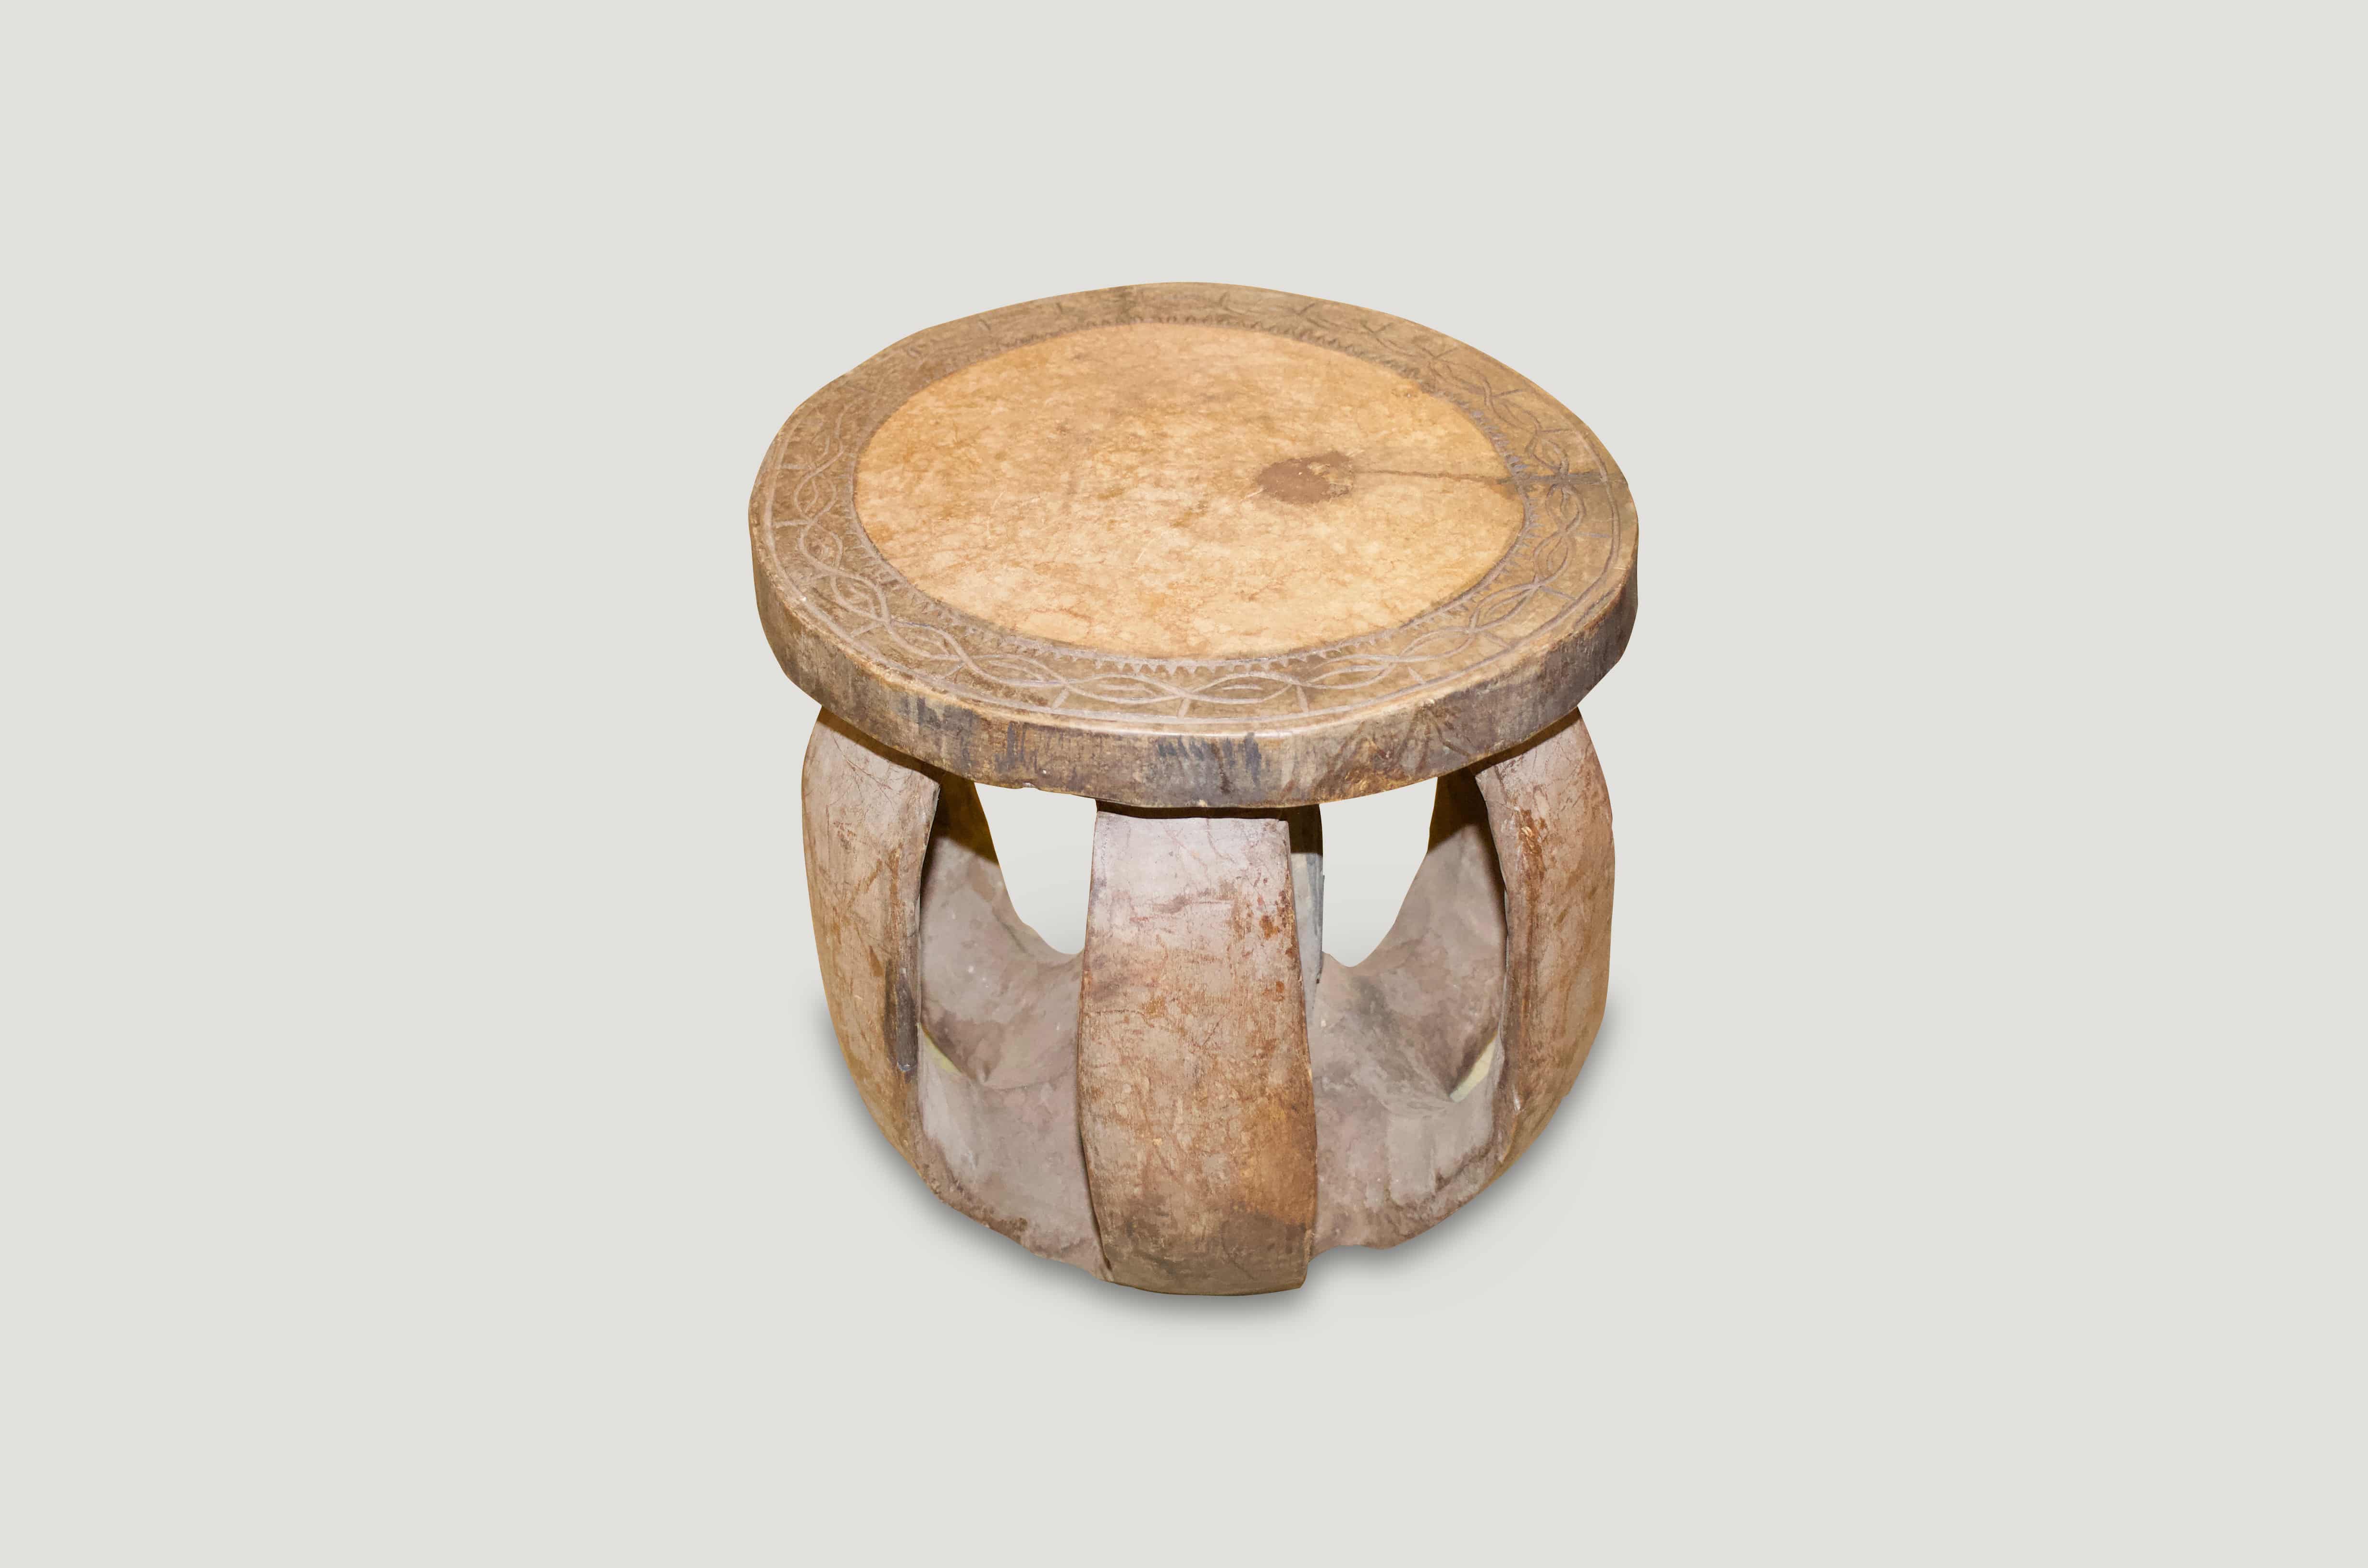 African mahogany wood side table or stool